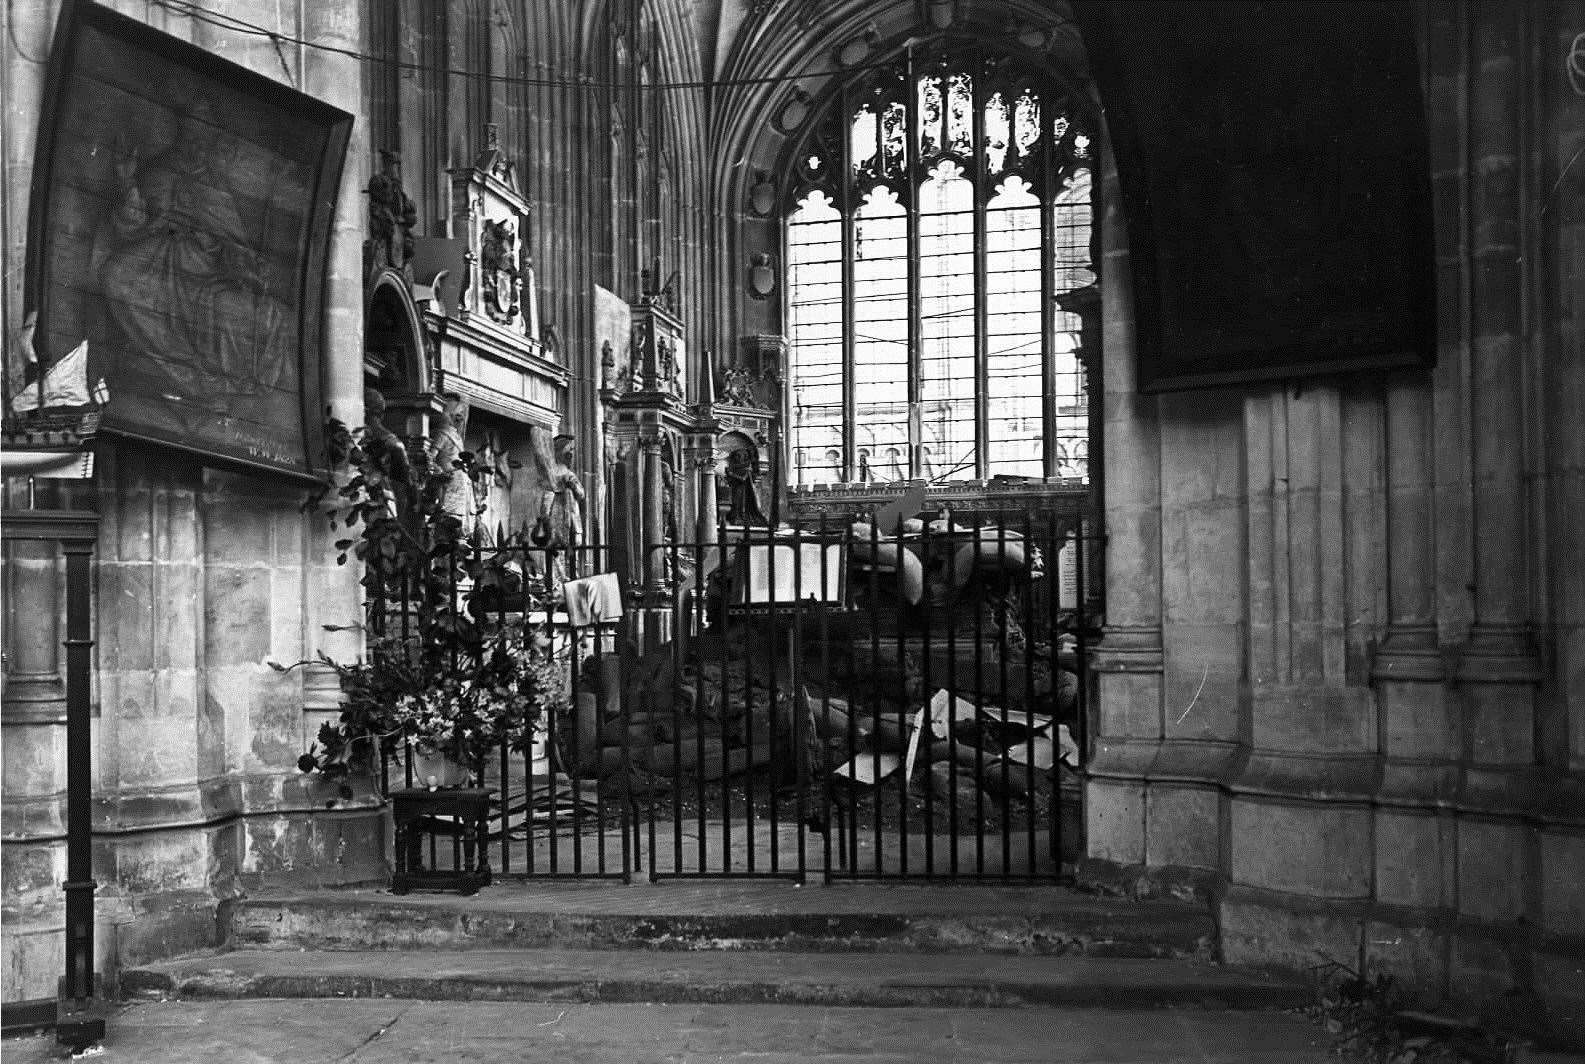 Damage in the Warriors Chapel of Canterbury Cathedral caused on June 1